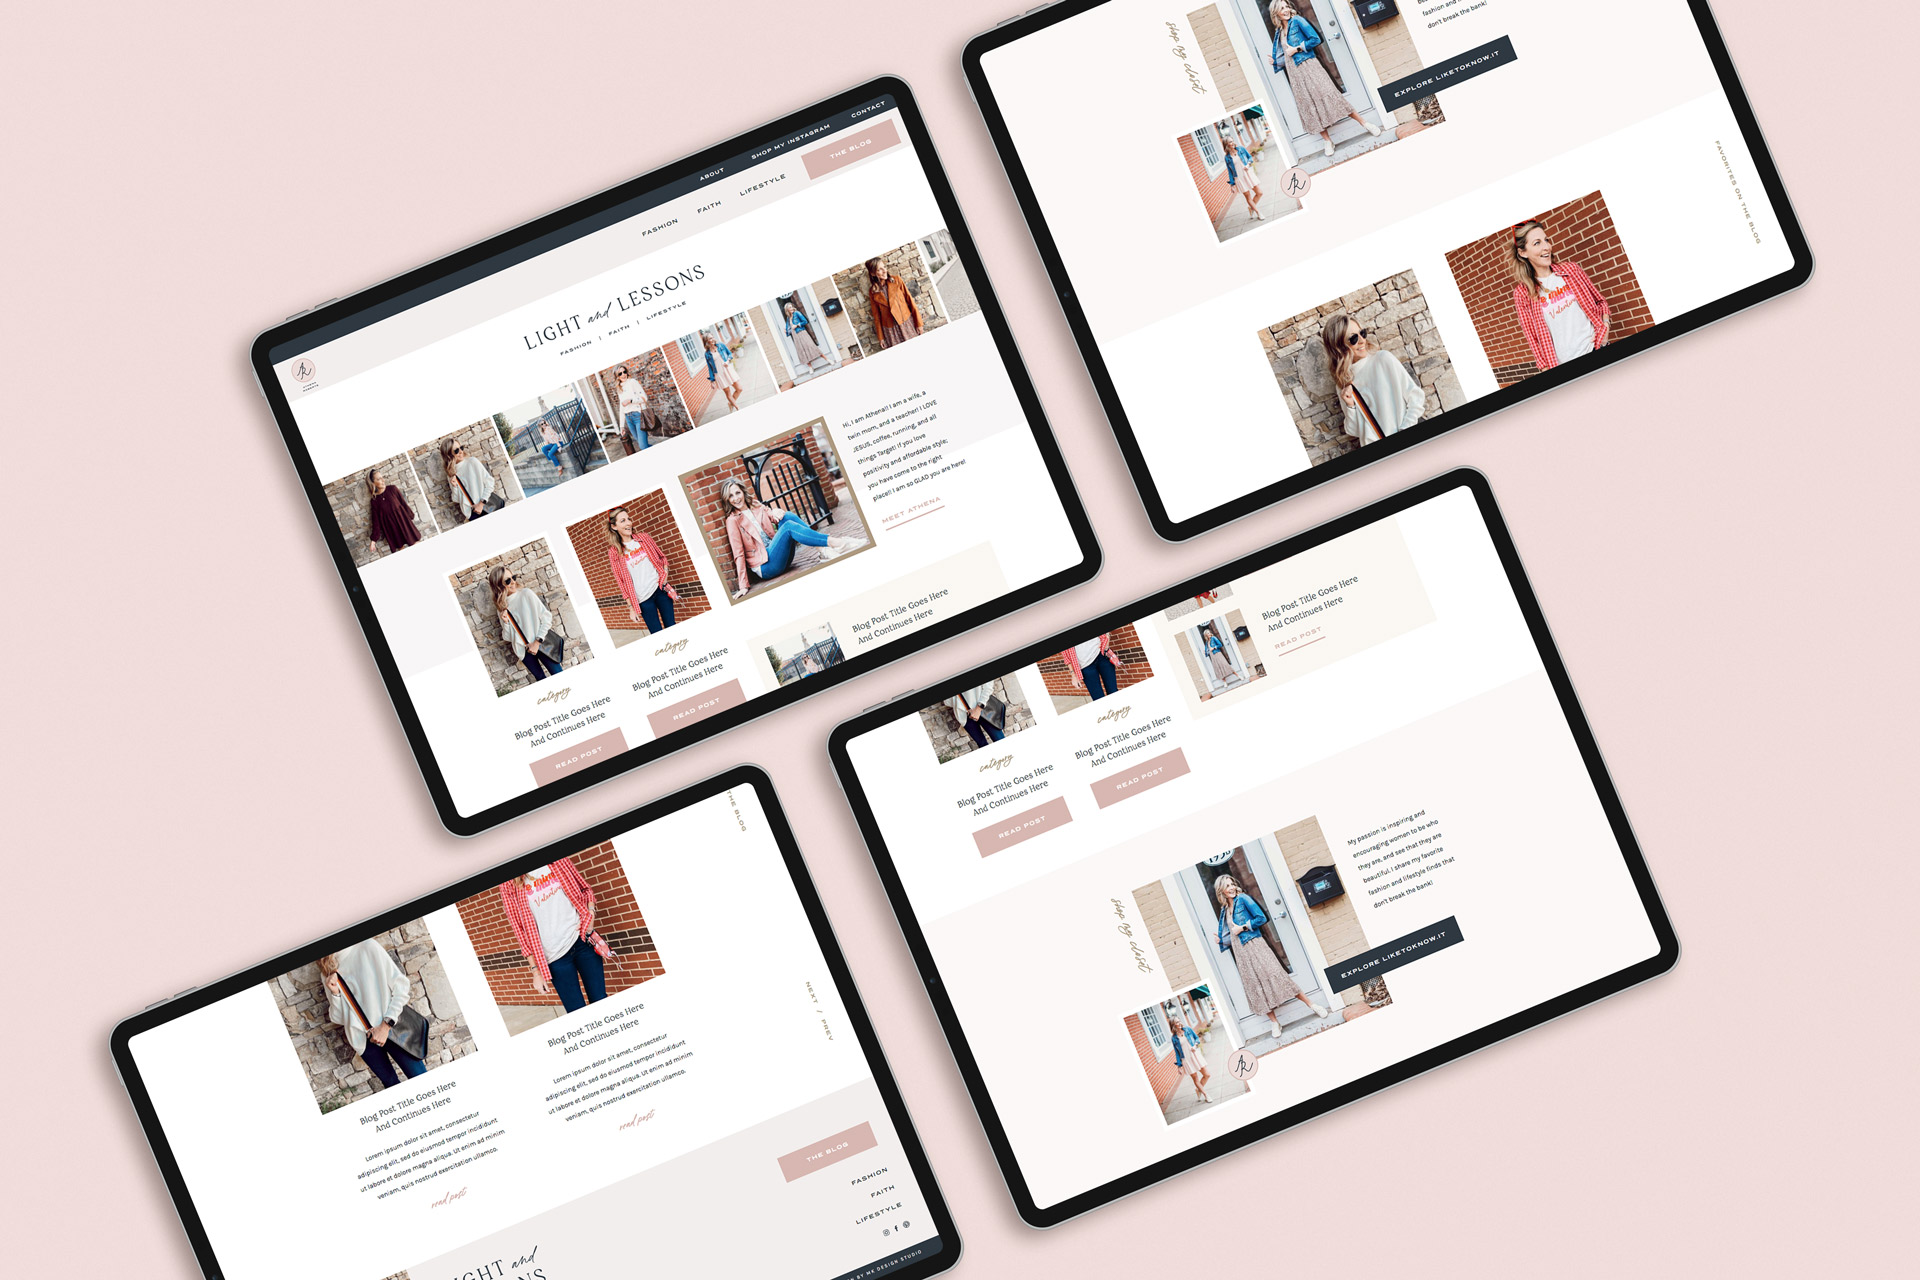 Ipad mockups of a website showing you how to make your website stand out